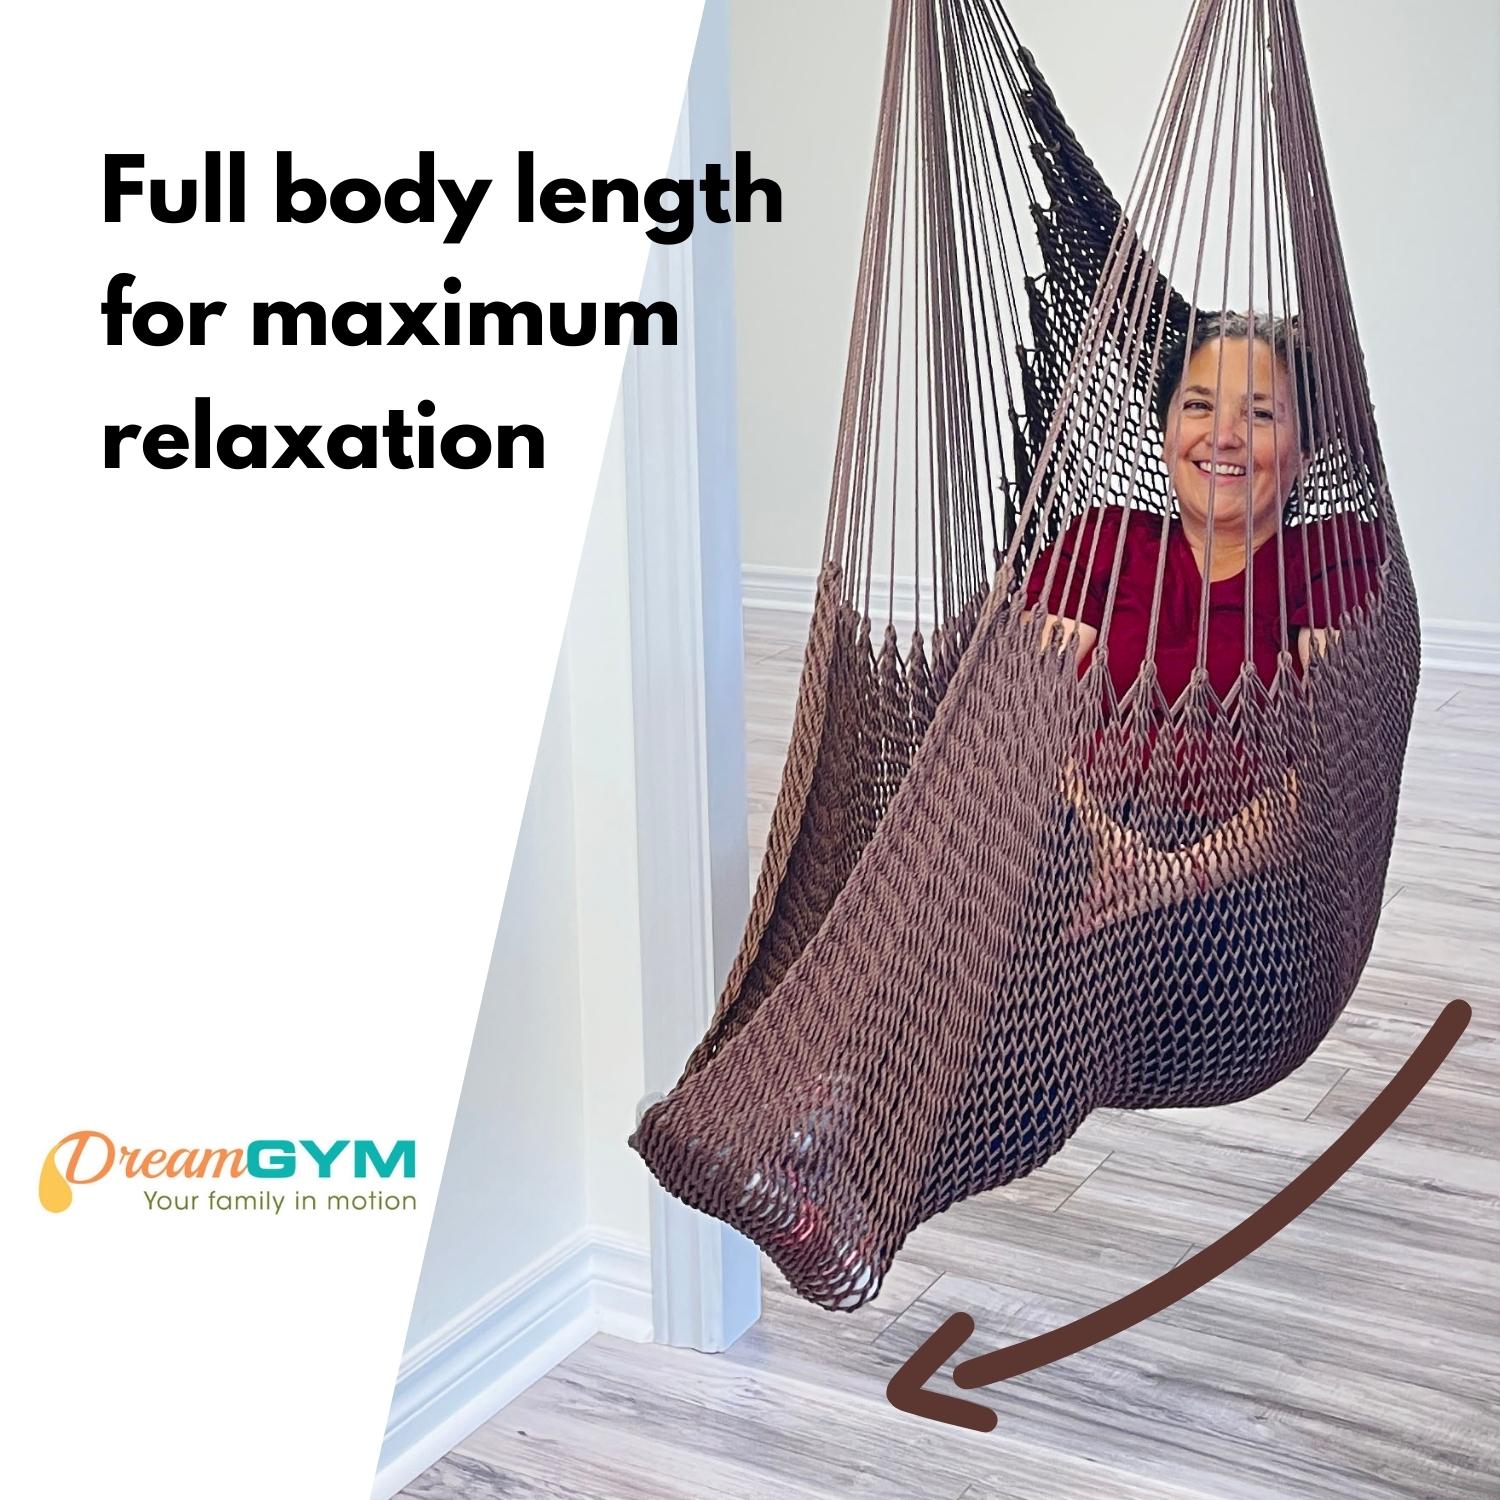 A woman is sitting in a brown hammock swing, that supports full body length for maximum relaxtion.